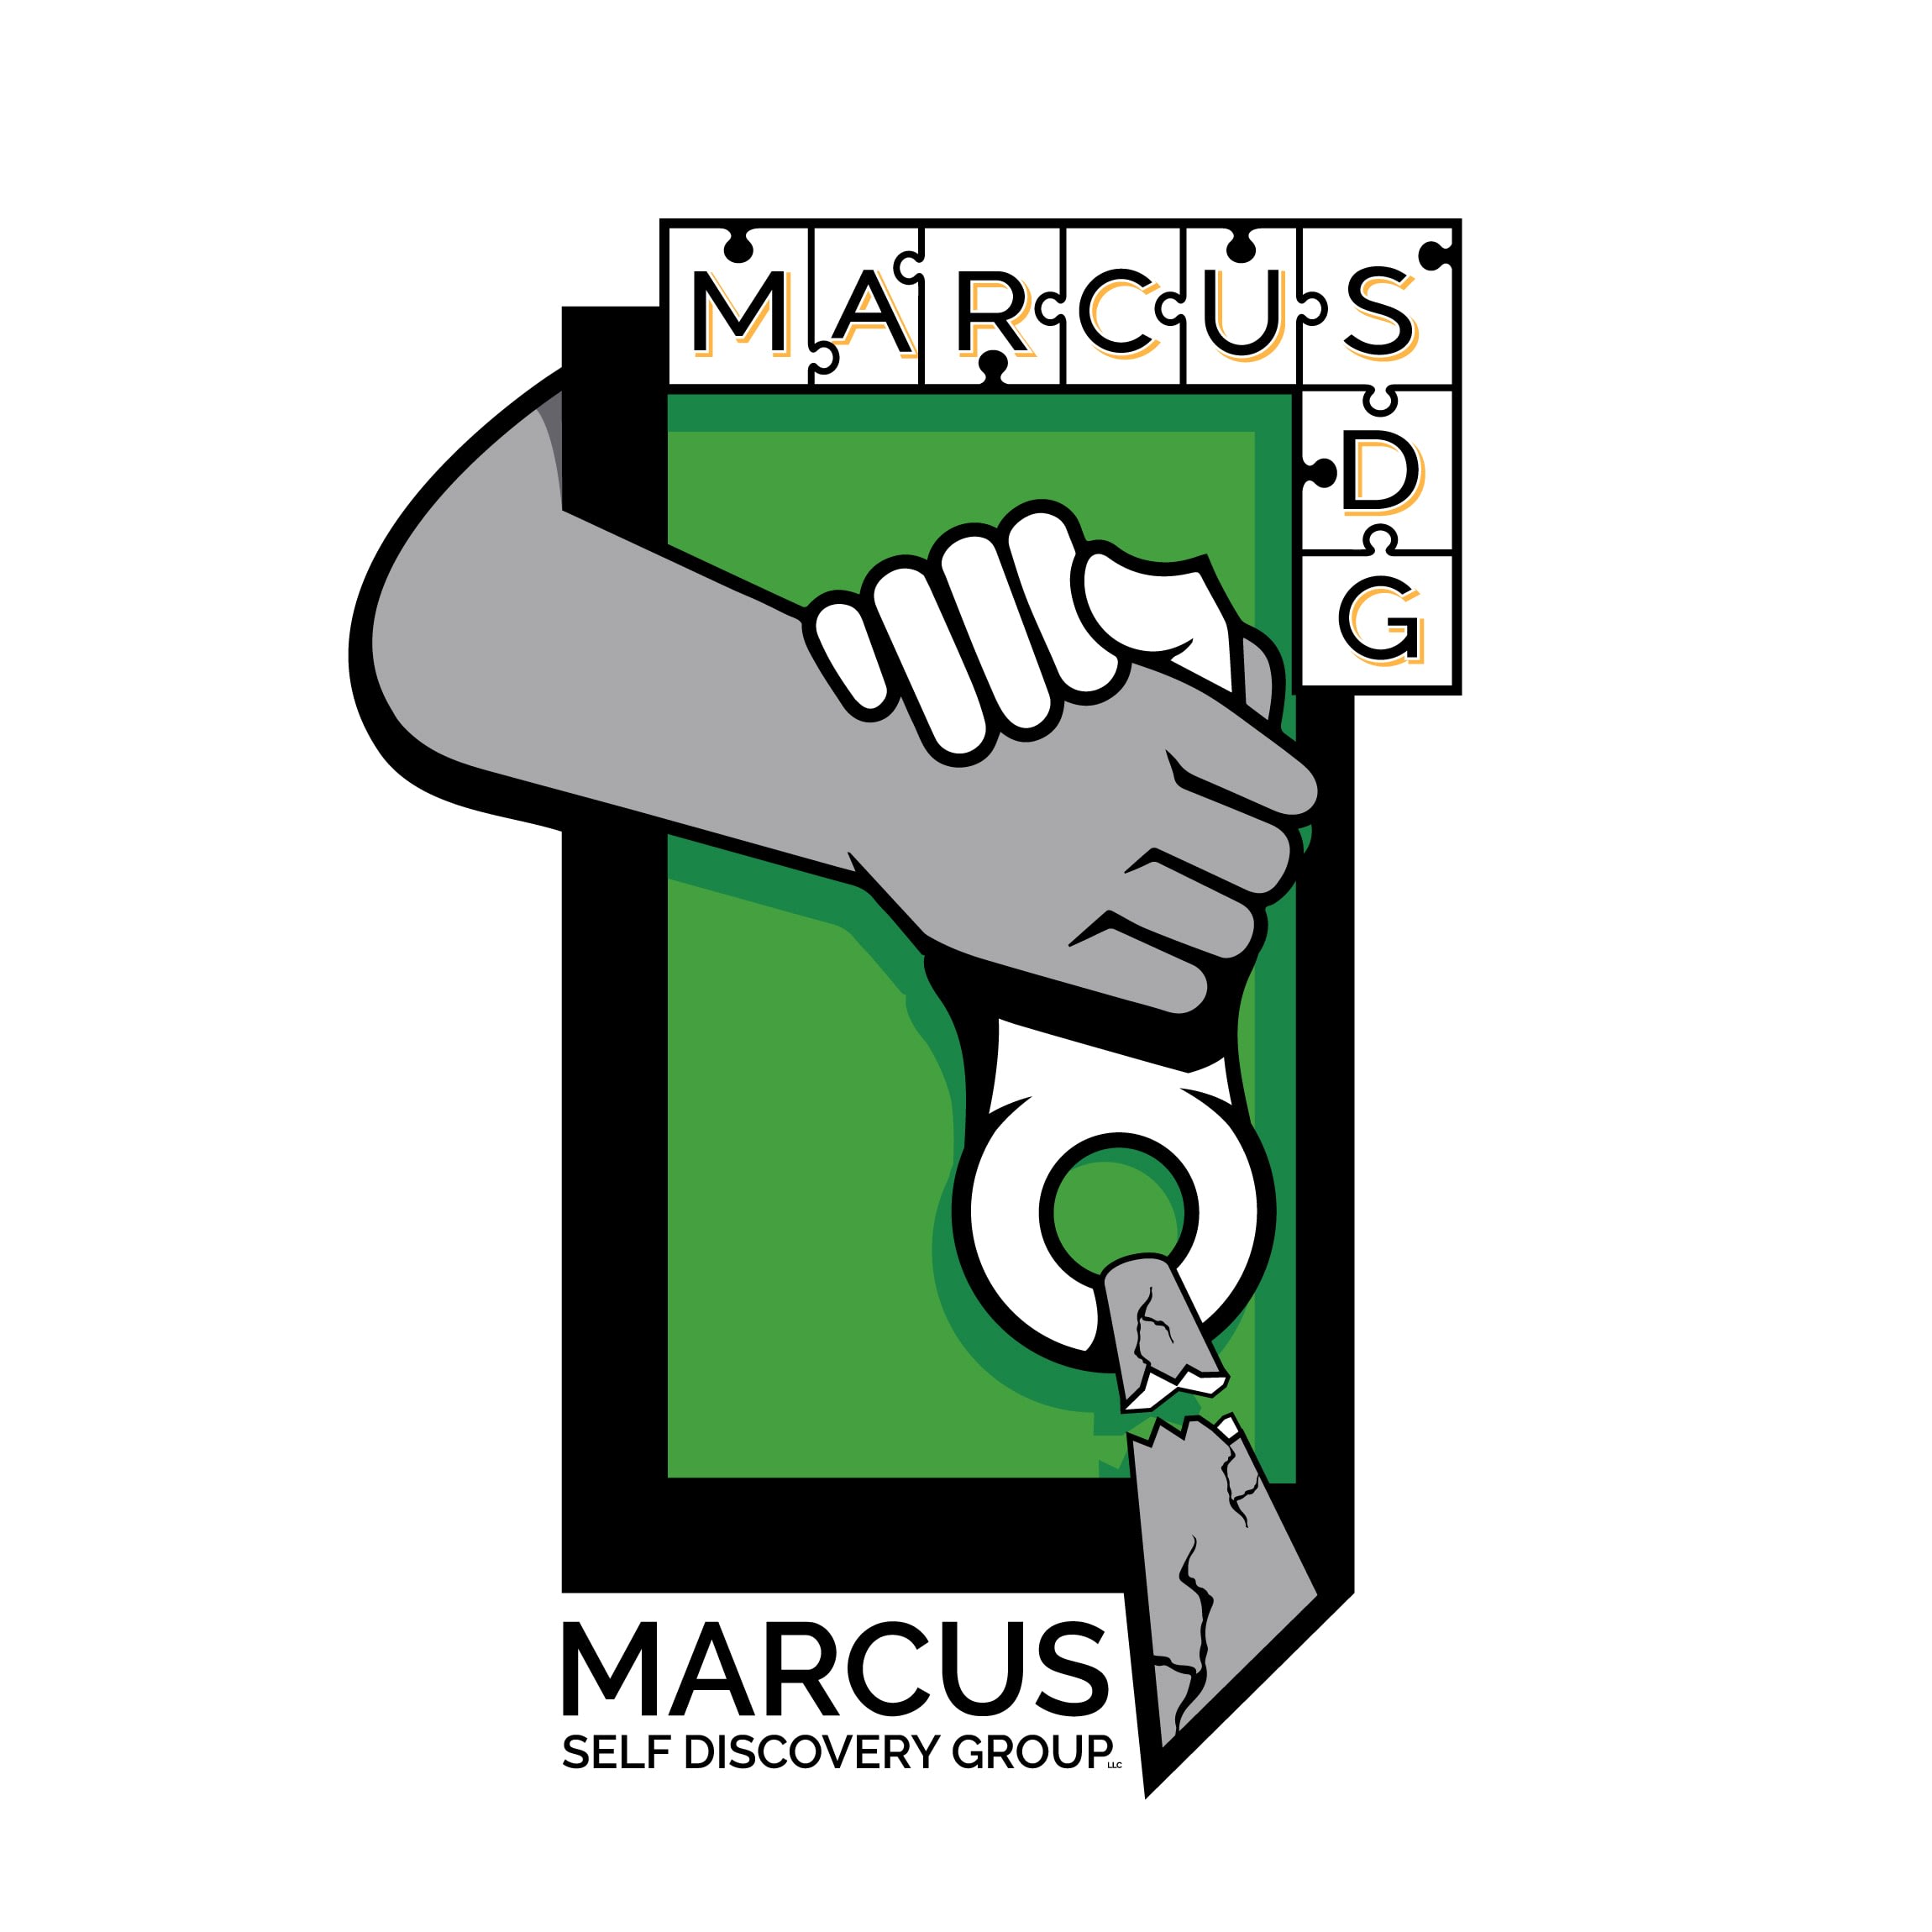 Marcus Self Discovery Group (M.A.R.C.U.S.)